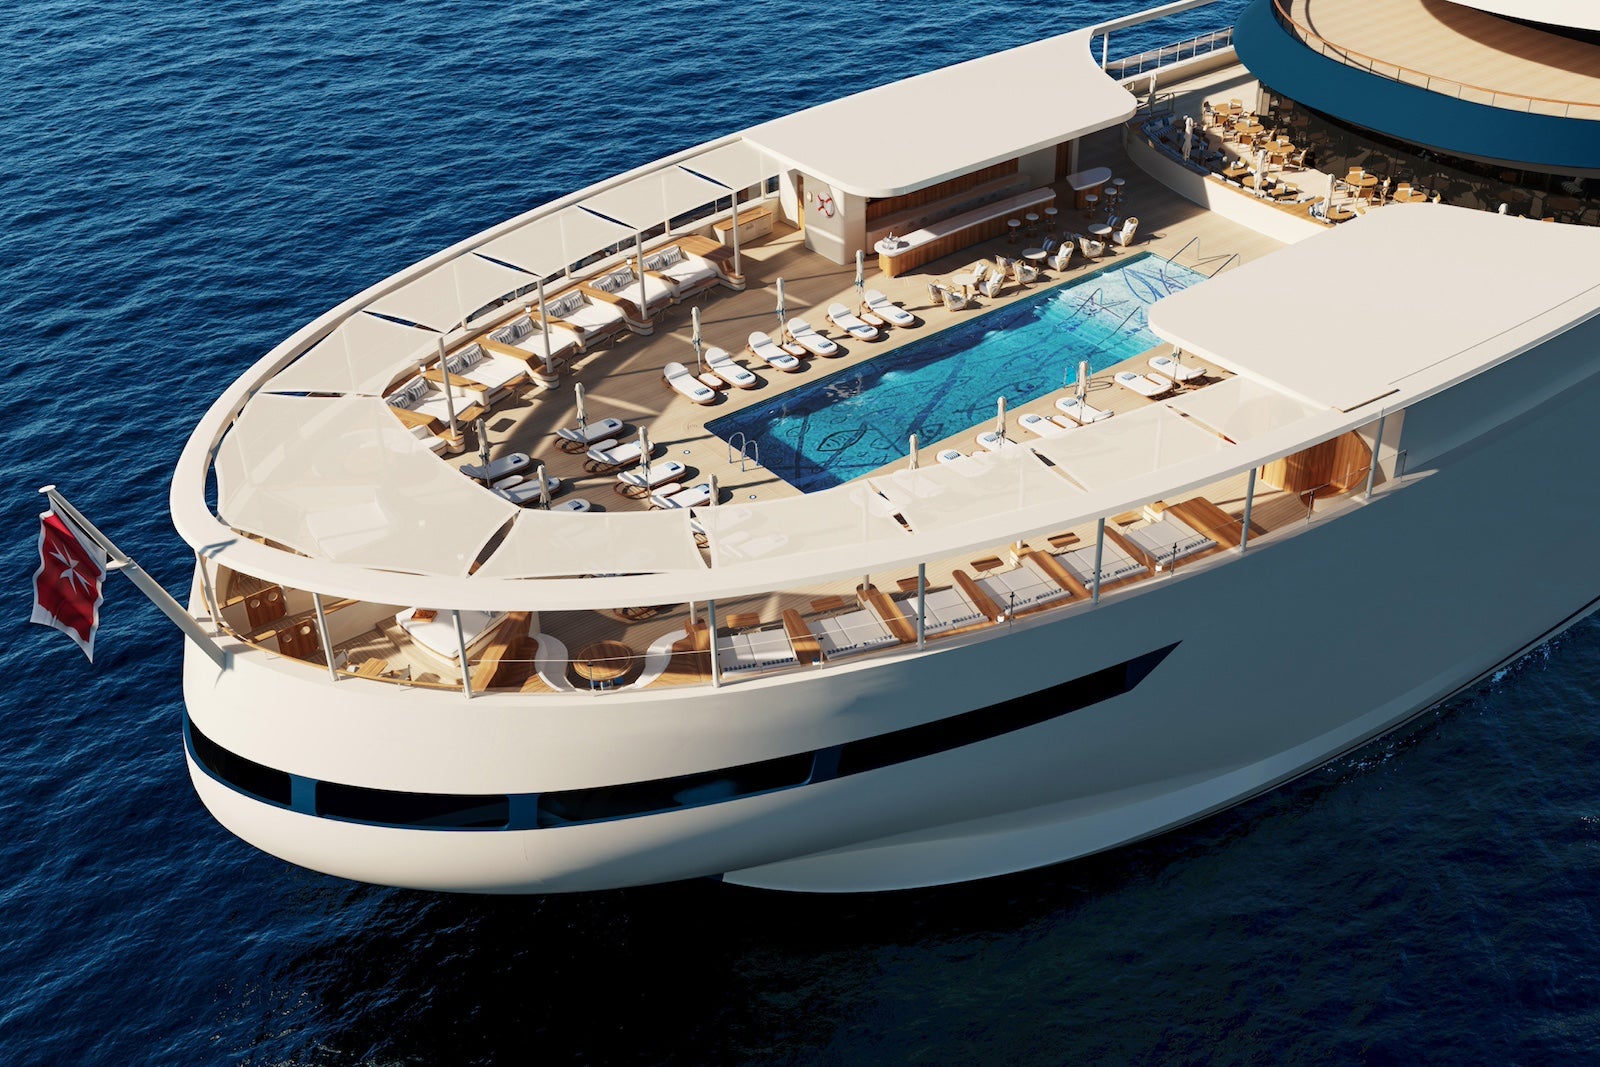 Four Seasons’ exclusive new yachts will take you to ritzy ports in the Caribbean and Mediterranean come 2026